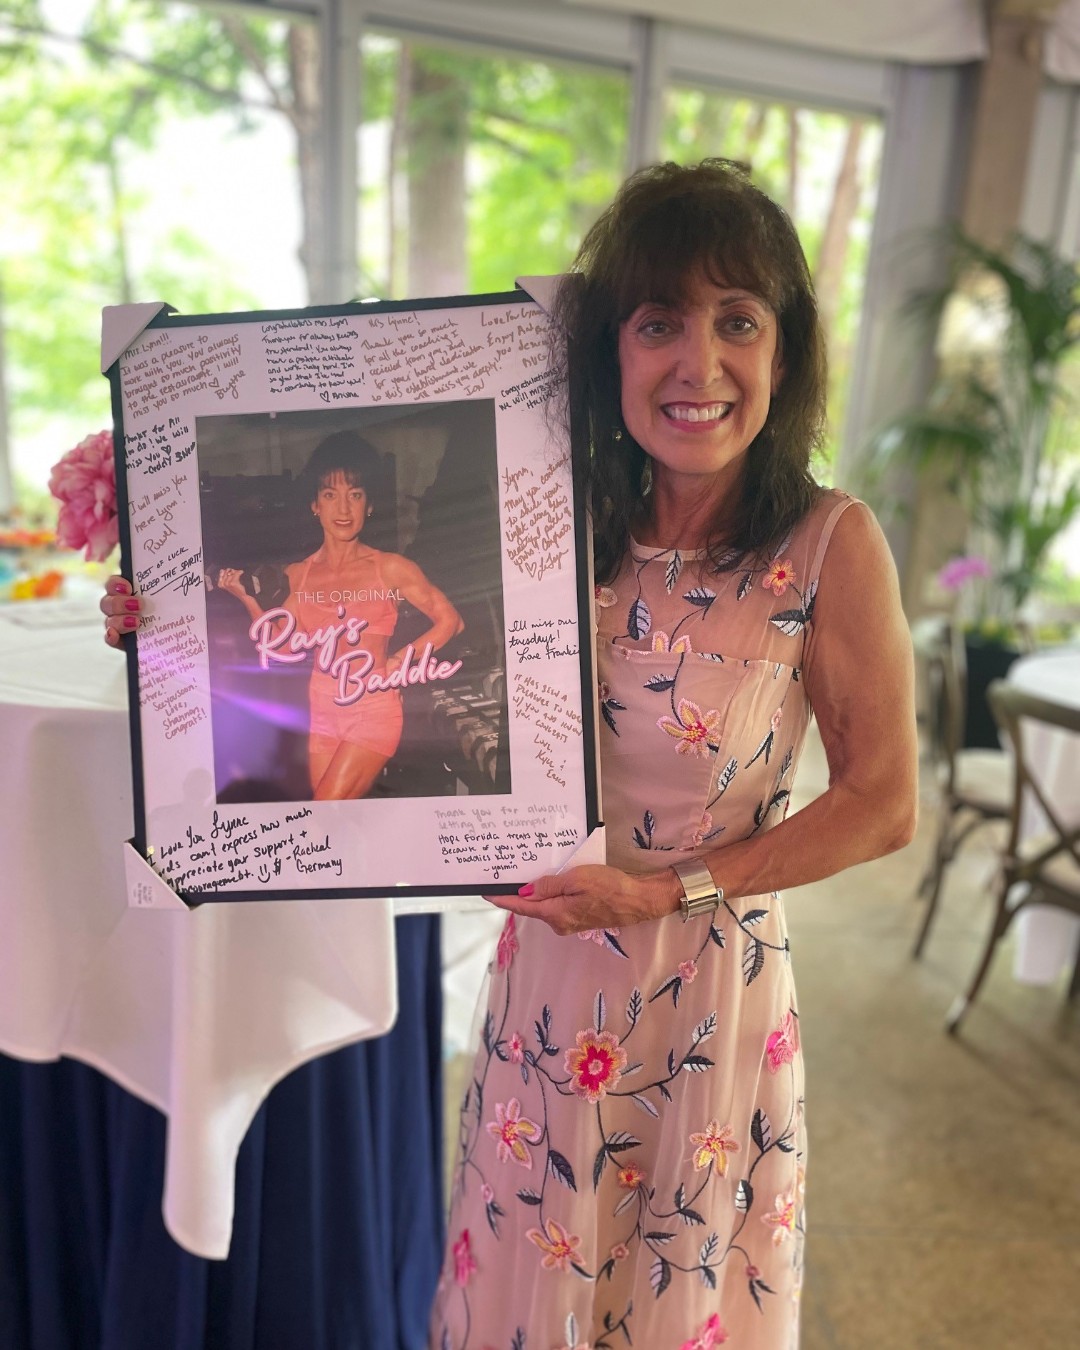 Lynne Gomez smiles as she holds a framed photo of herself when she was younger and lifting weights. Text on the photo reads: The original Ray's Baddie. Around the photo is white space where many people have left nice messages for Lynne.